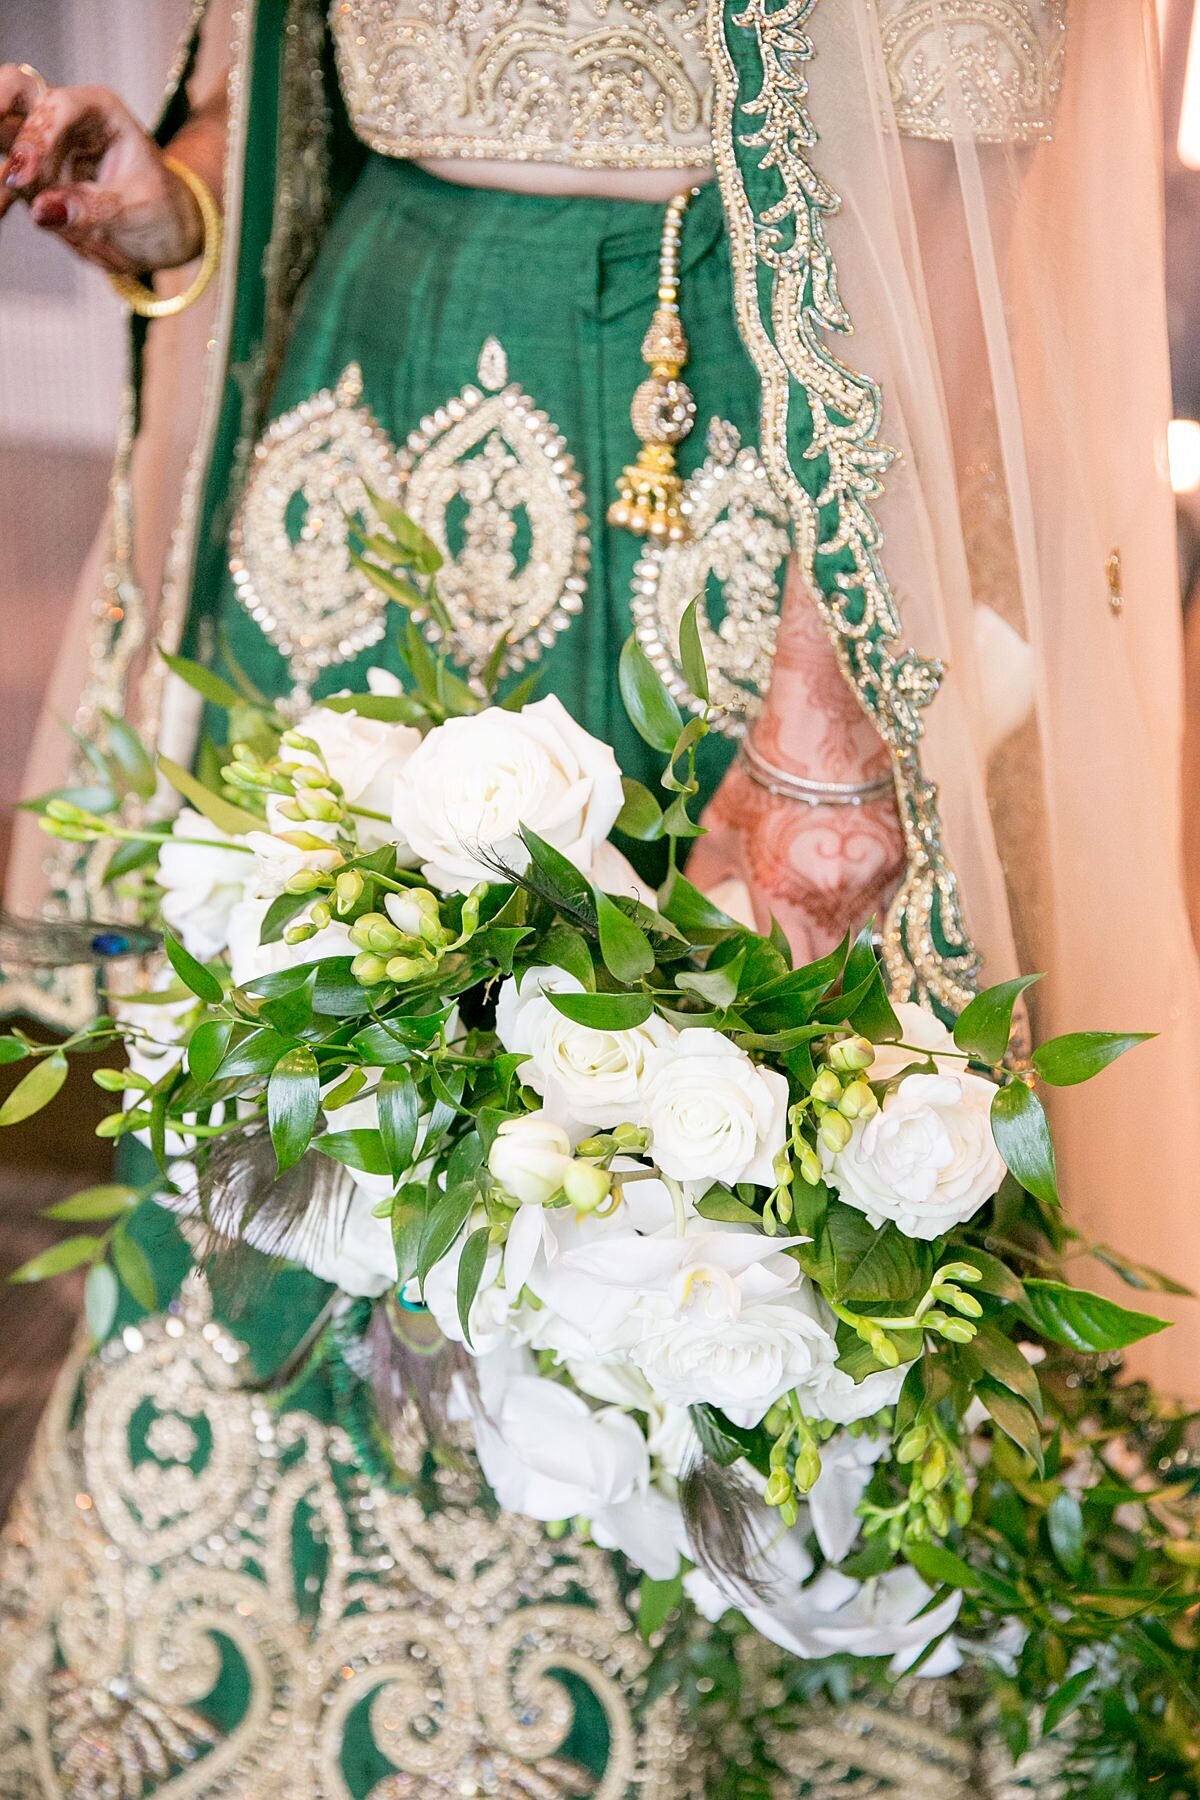 Indian bride wearing a gold and green saree holds a white cascading bouquet or orchids and roses as she displays her mendhi.